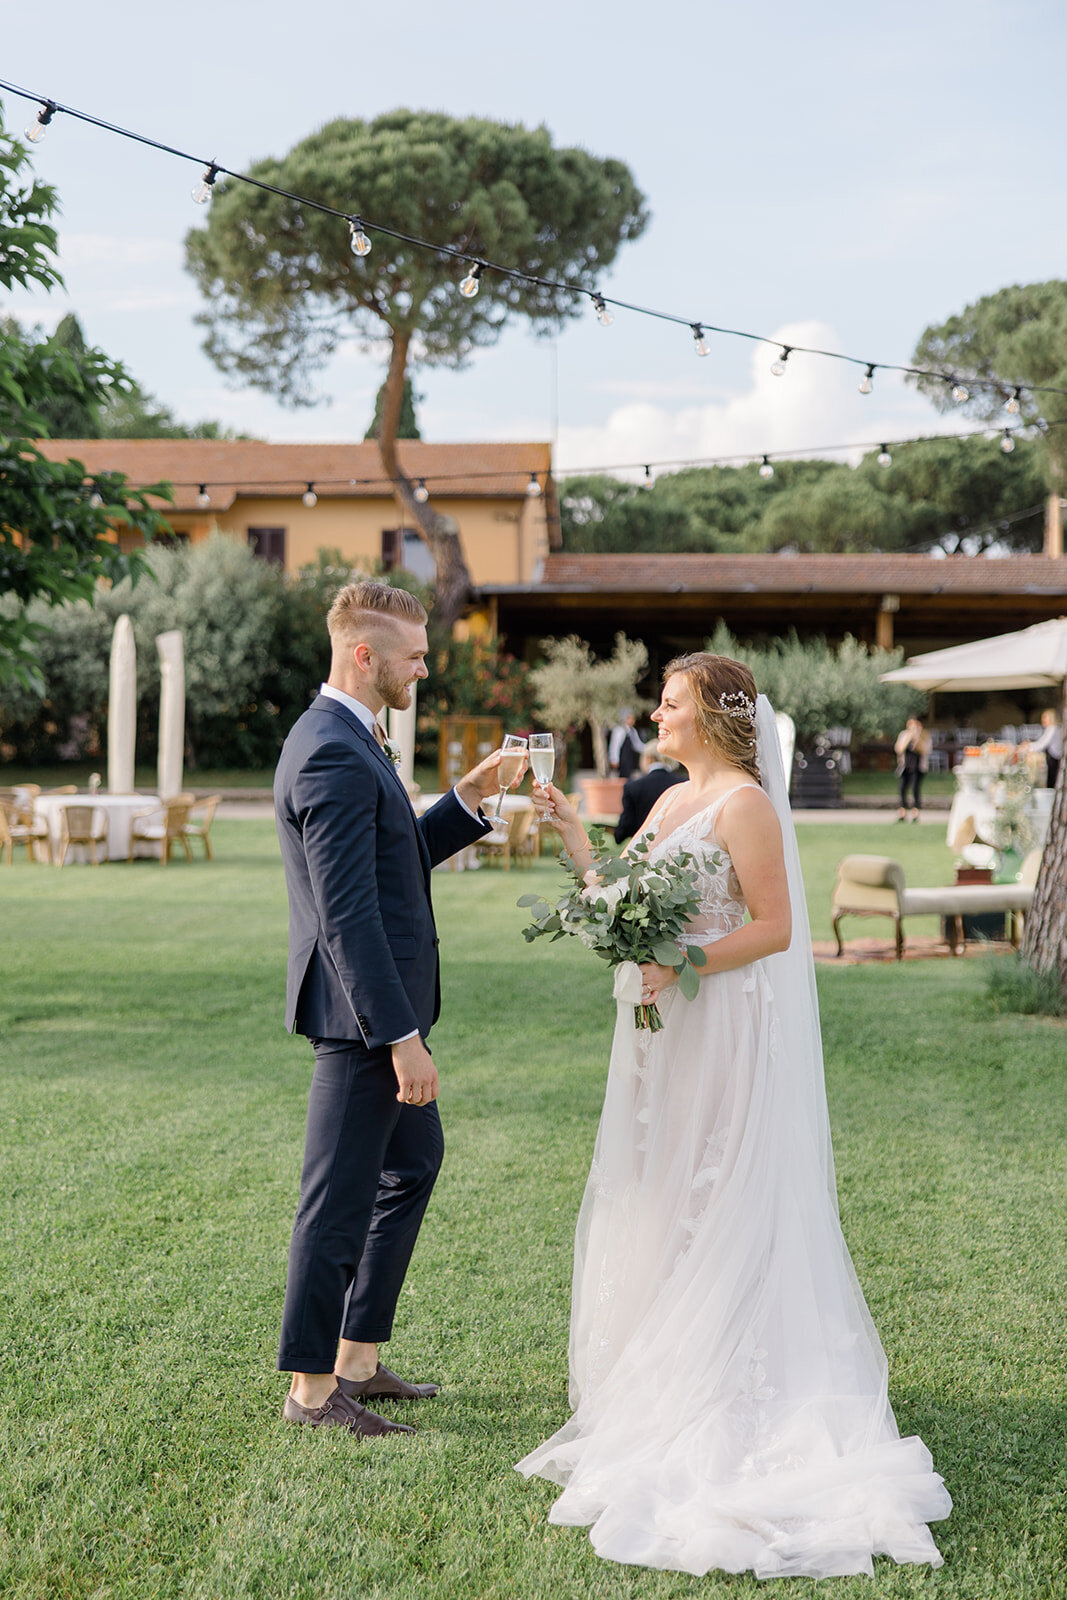 Rome_Italy_Wedding_BrittanyNavinPhotography-384